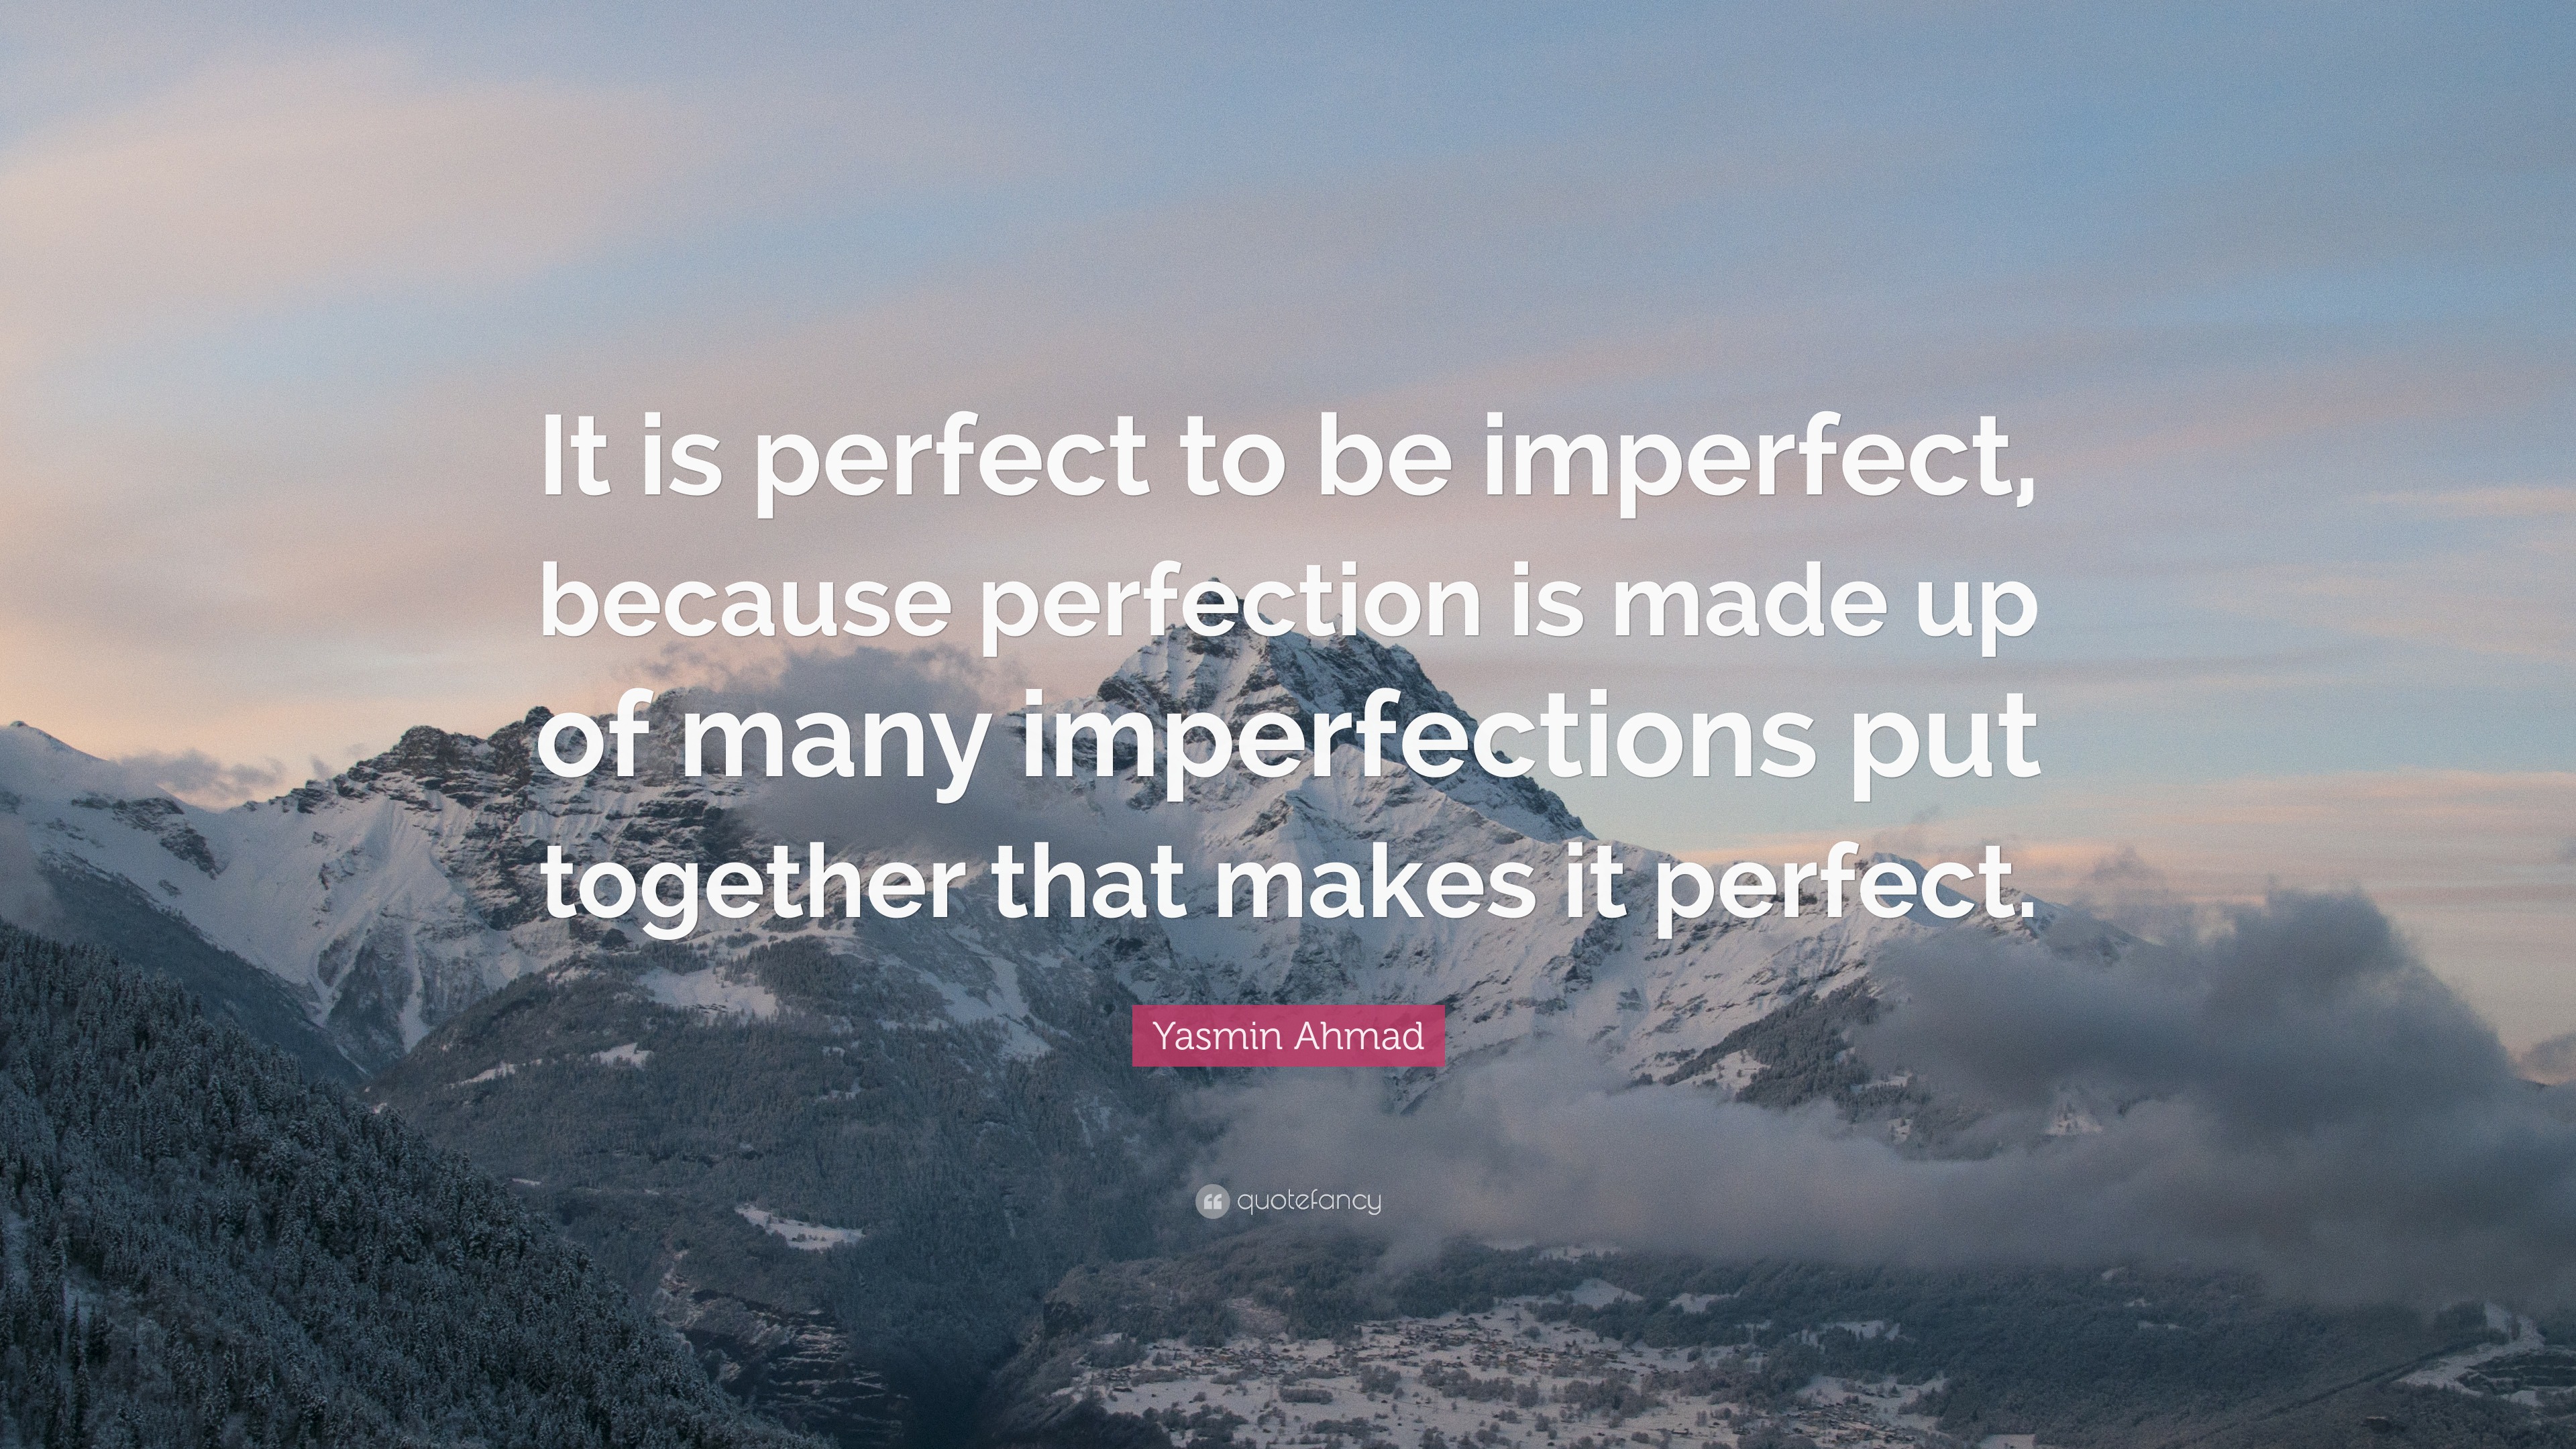 quotes about being unperfect